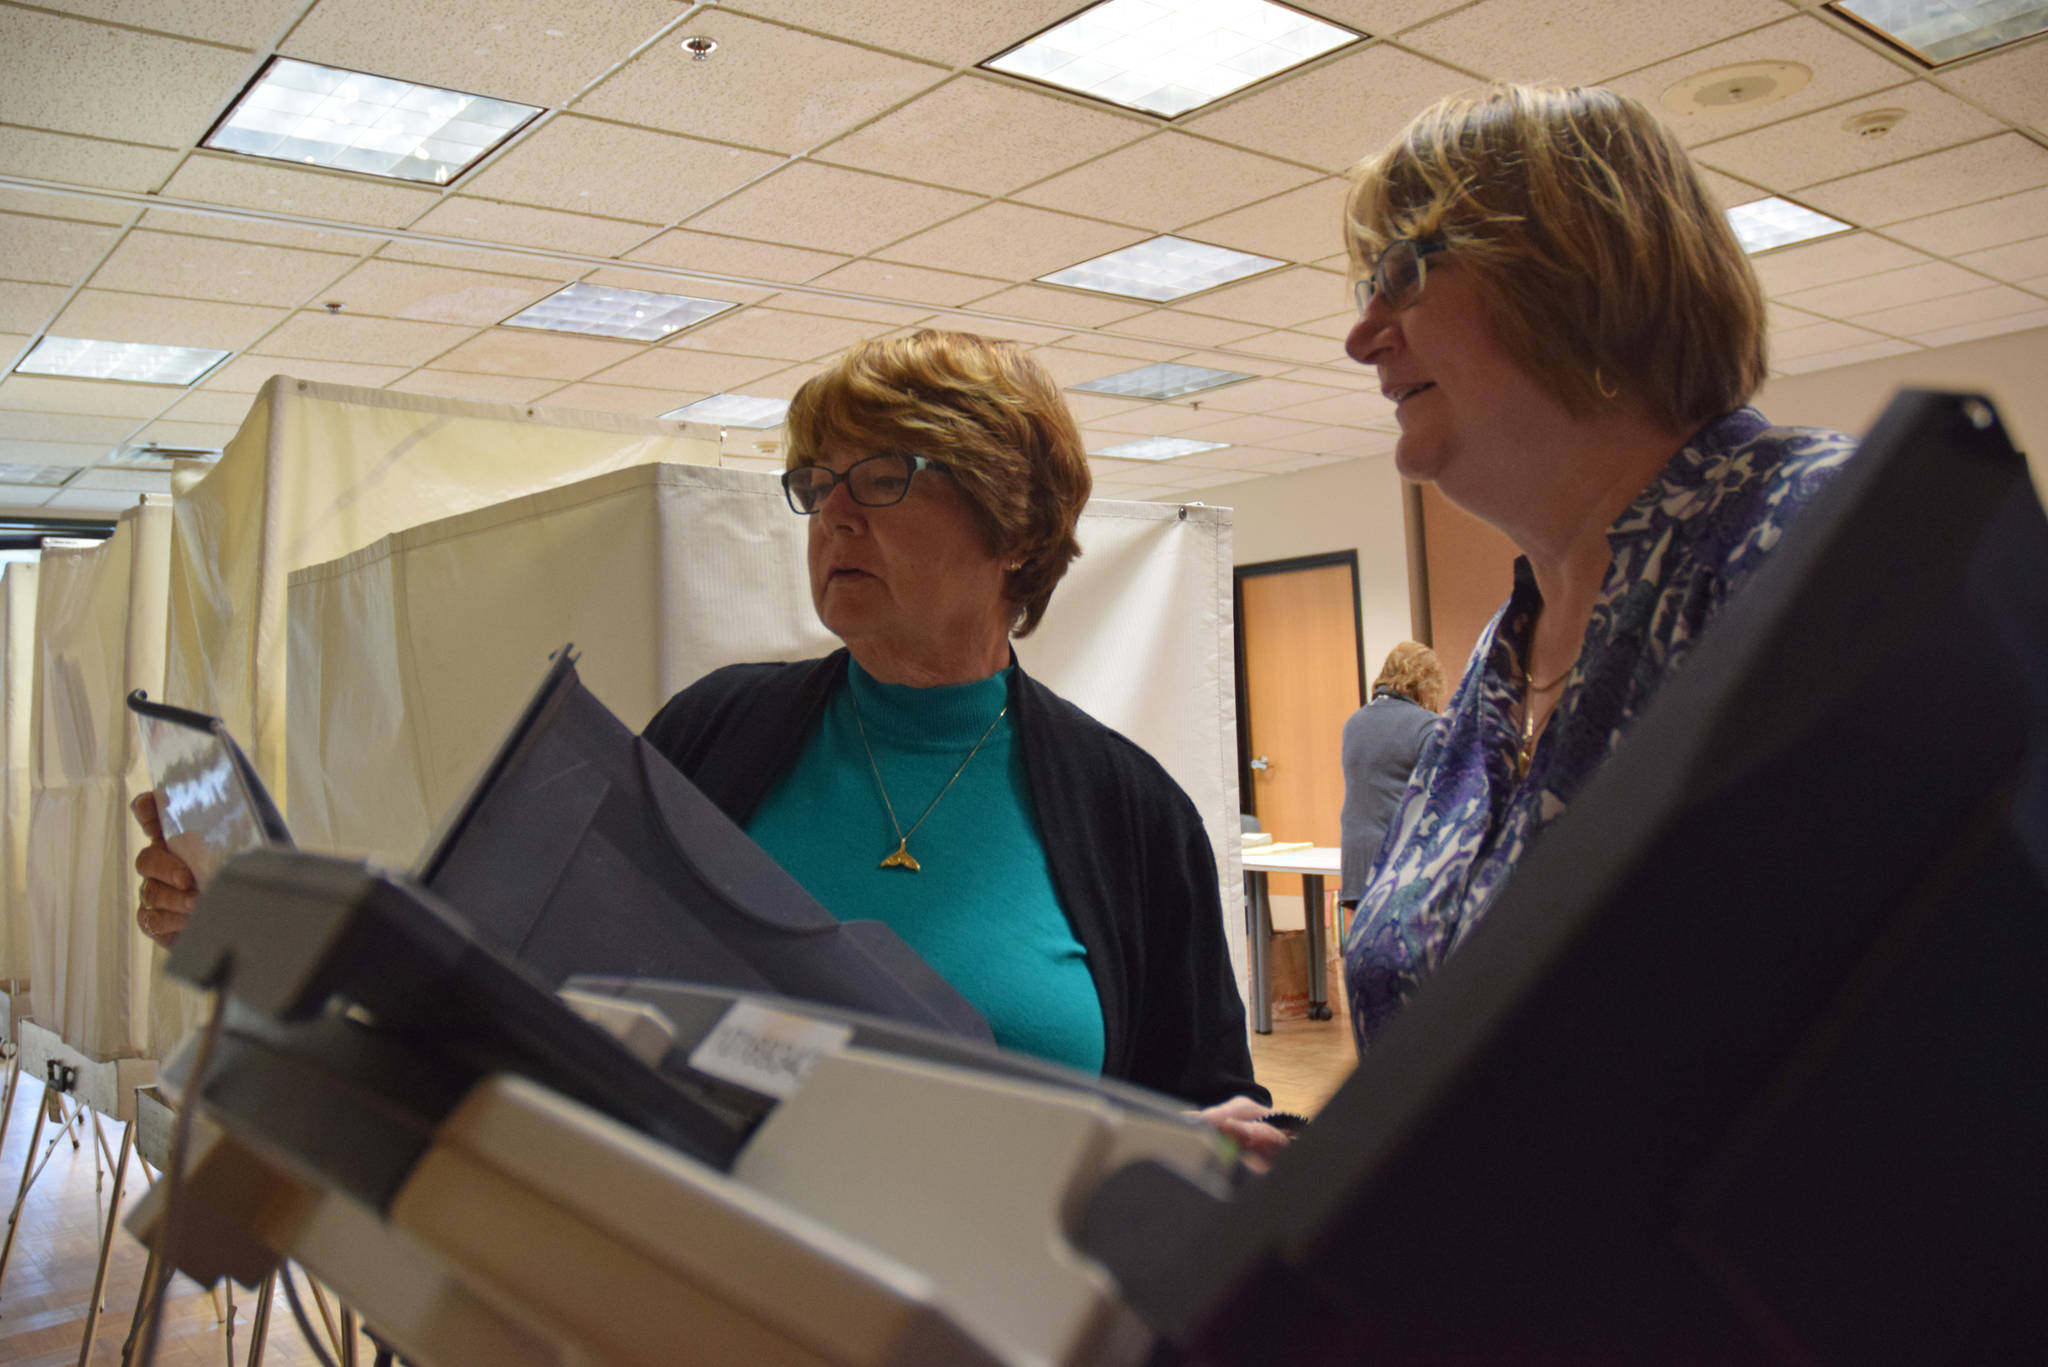 Election volunteers at the Douglas Public Library set up the touch-screen voting machine before the polls open Tuesday morning, Aug. 21, 2018. (James Brooks | Juneau Empire)